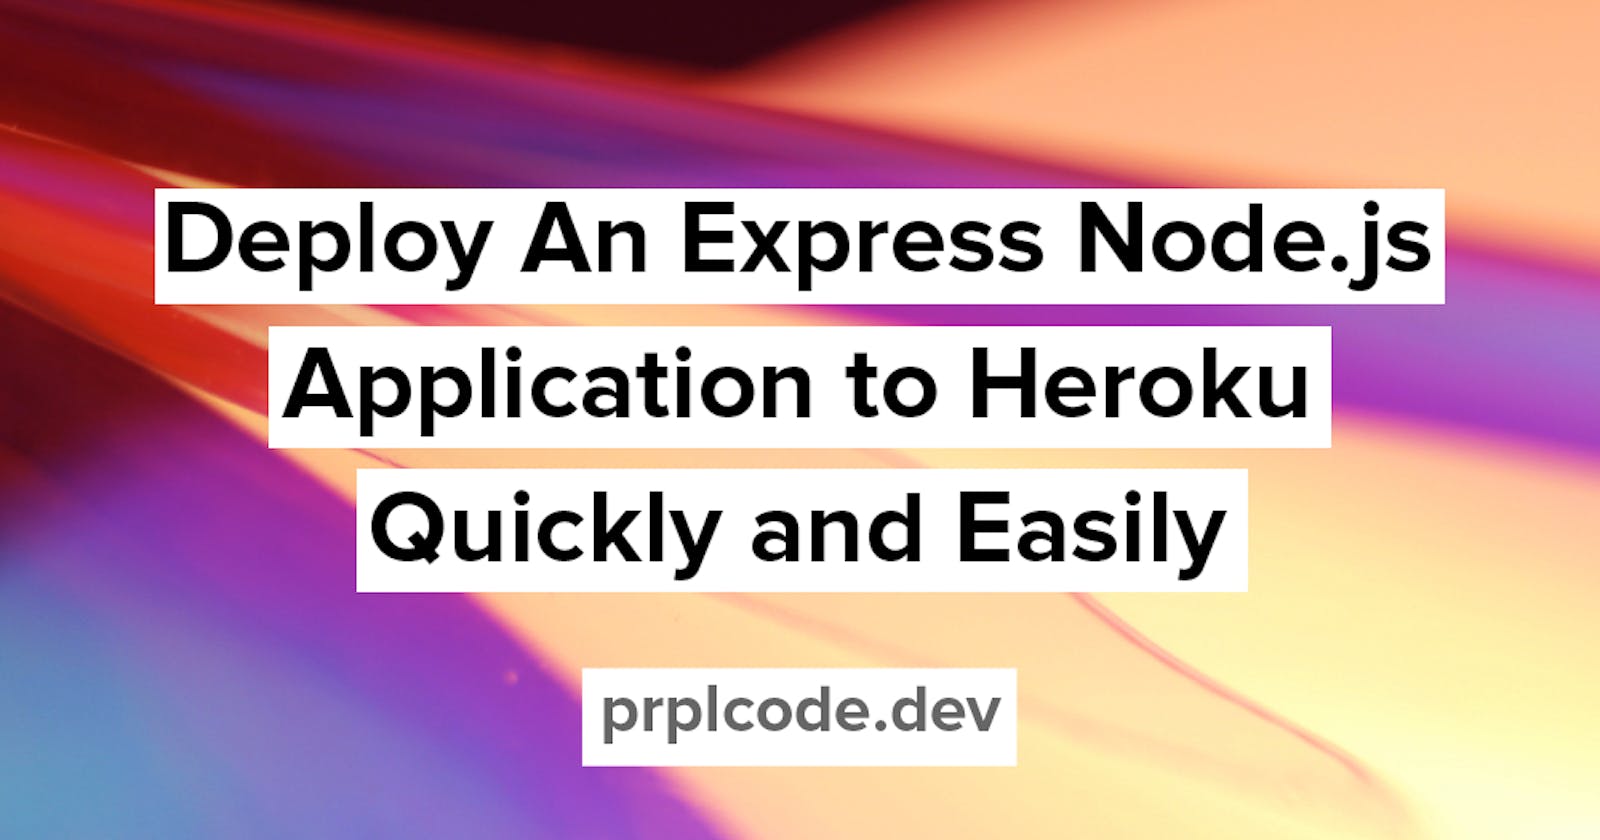 Deploy An Express Node.js Application to Heroku Quickly and Easily